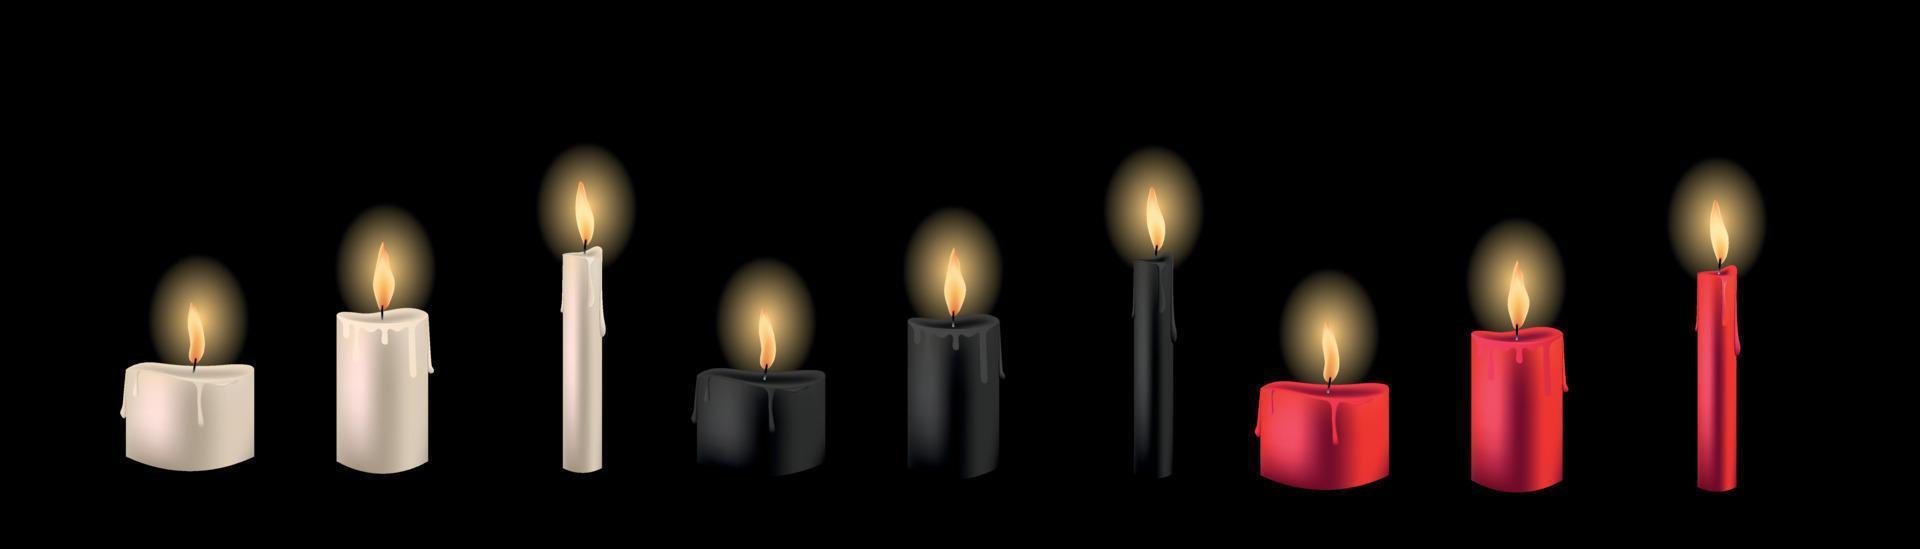 Vector realistic candle set with fire on dark background. Color candles collection with flame for halloween, magic, mystique, romantic. Burning candlelight